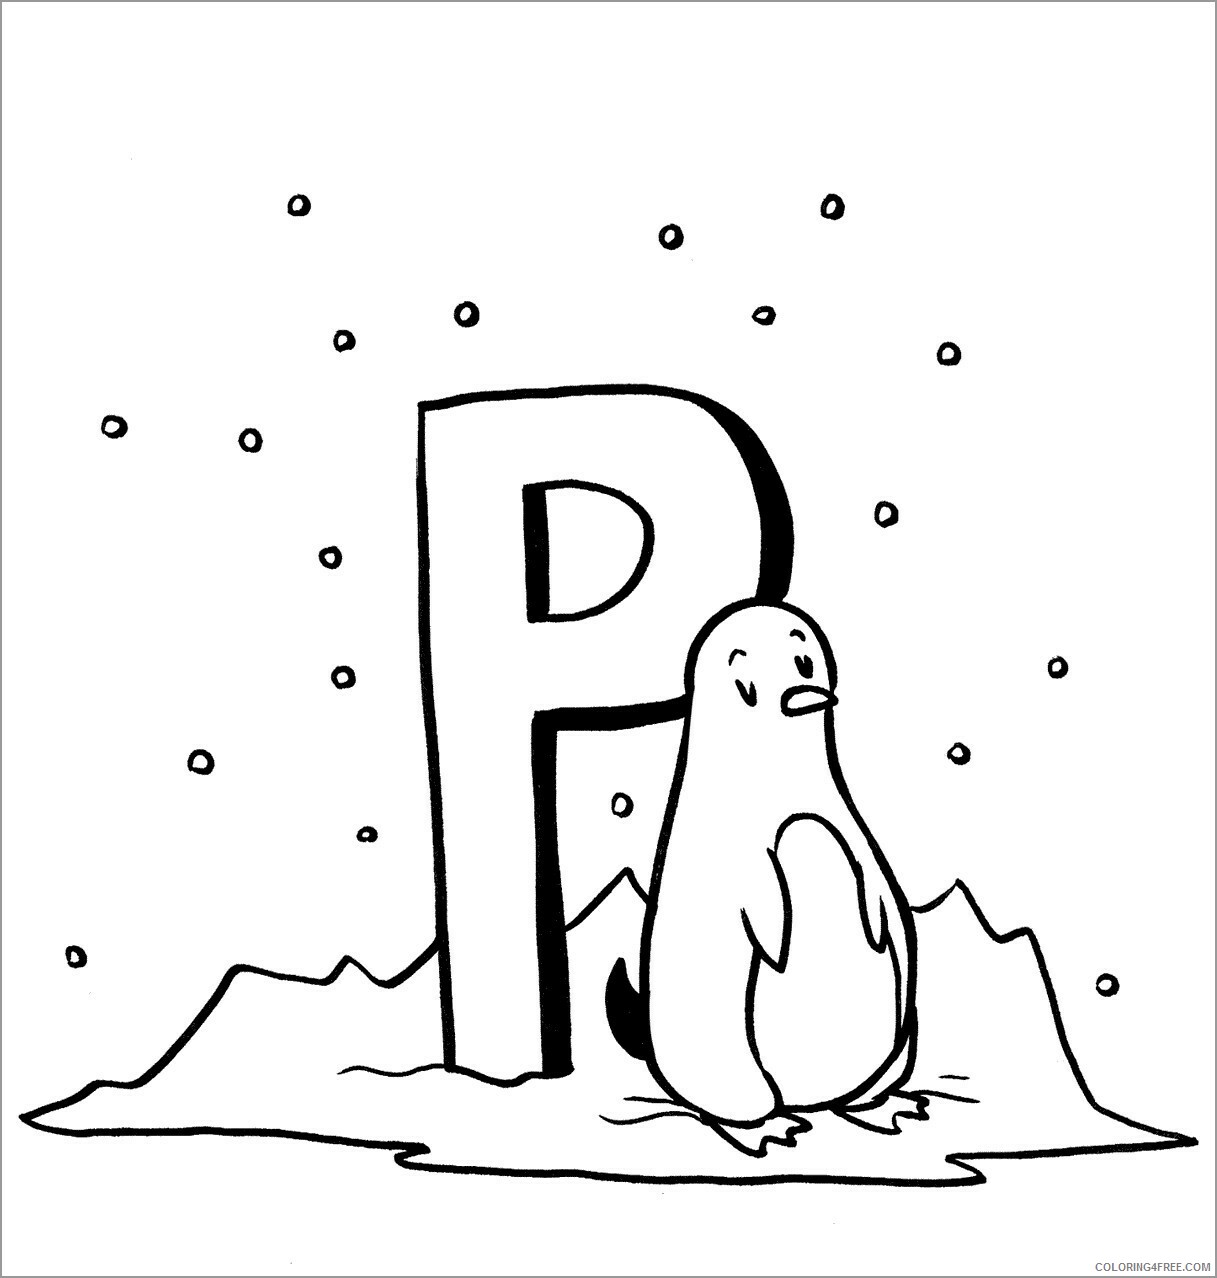 Penguins Coloring Pages Animal Printable Sheets p penguin for kids 2021 3835 Coloring4free